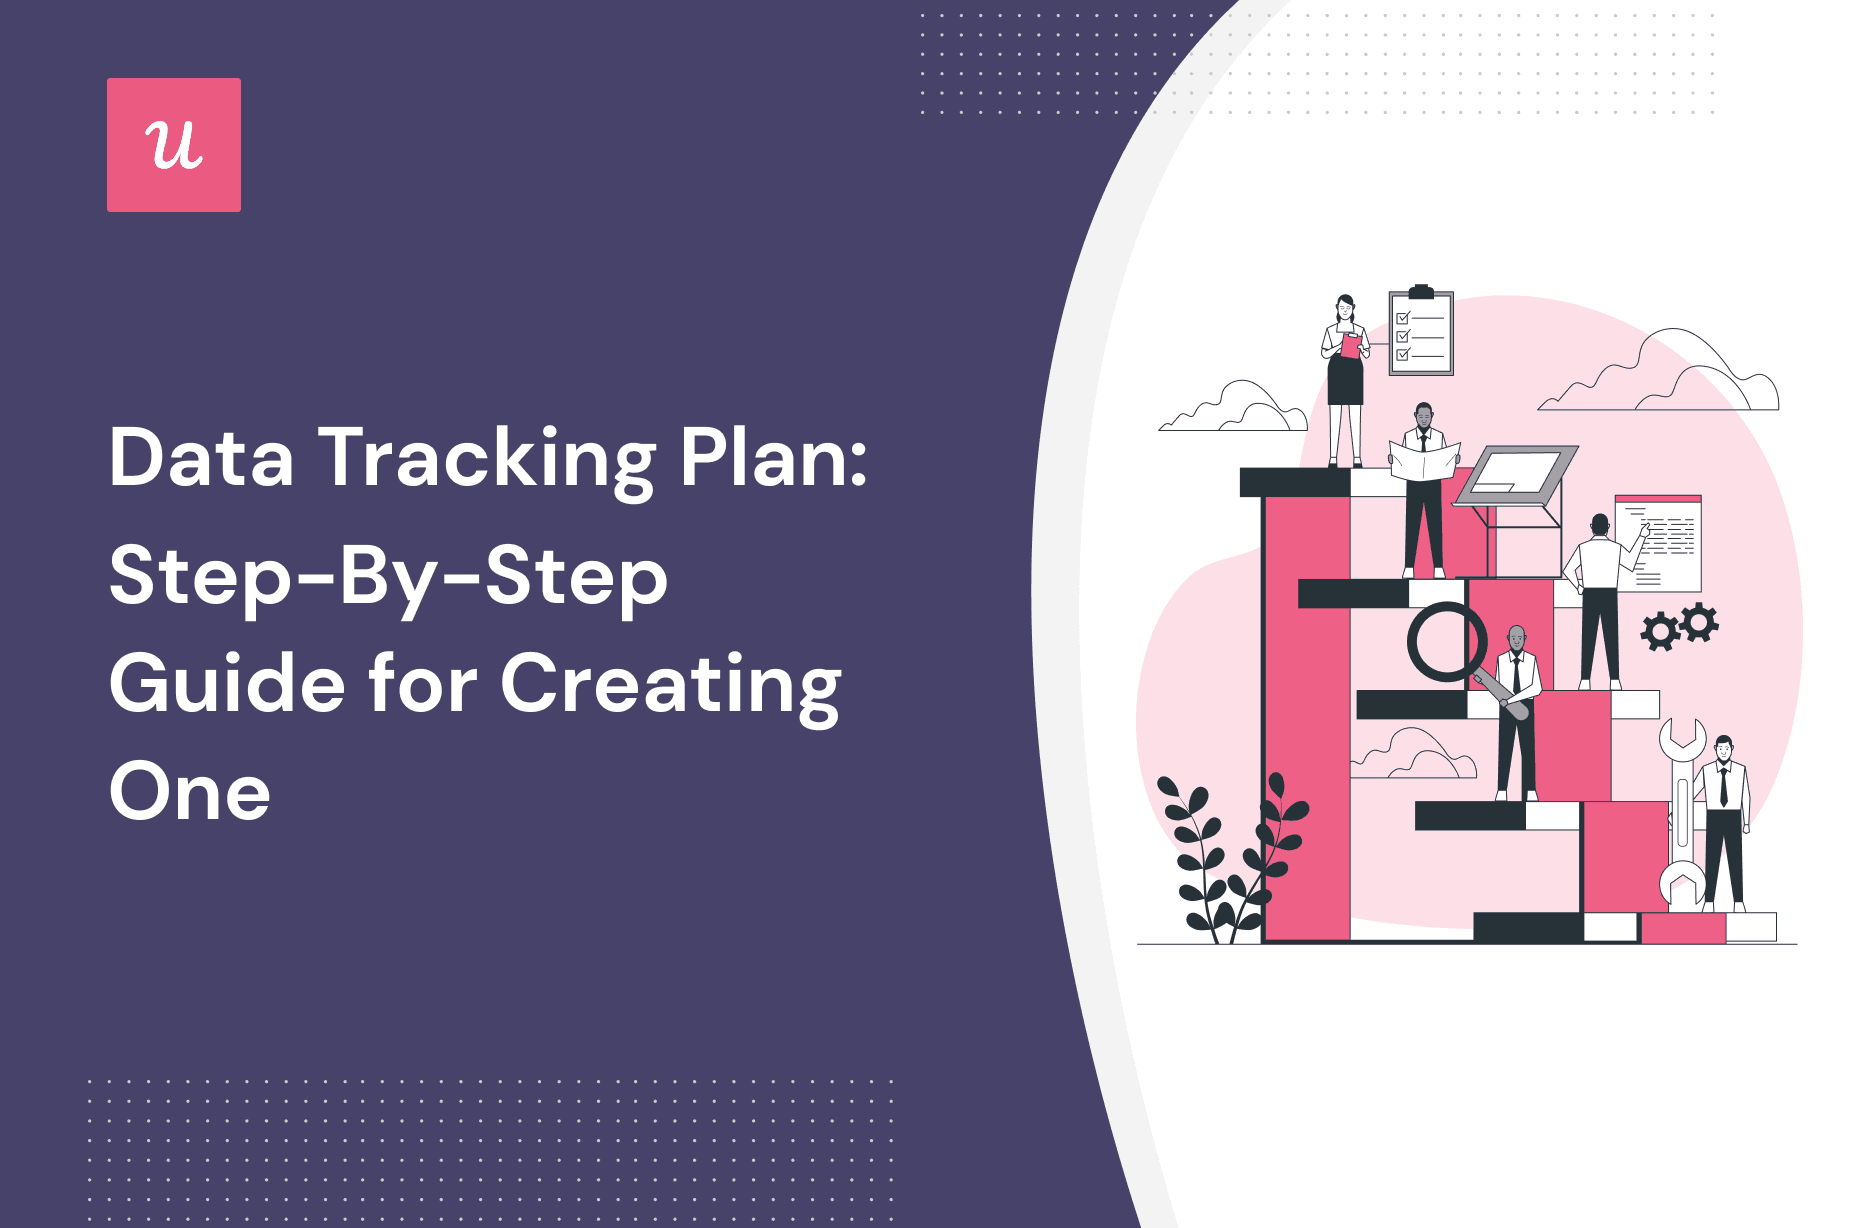 Data Tracking Plan: Step-By-Step Guide for Creating One cover